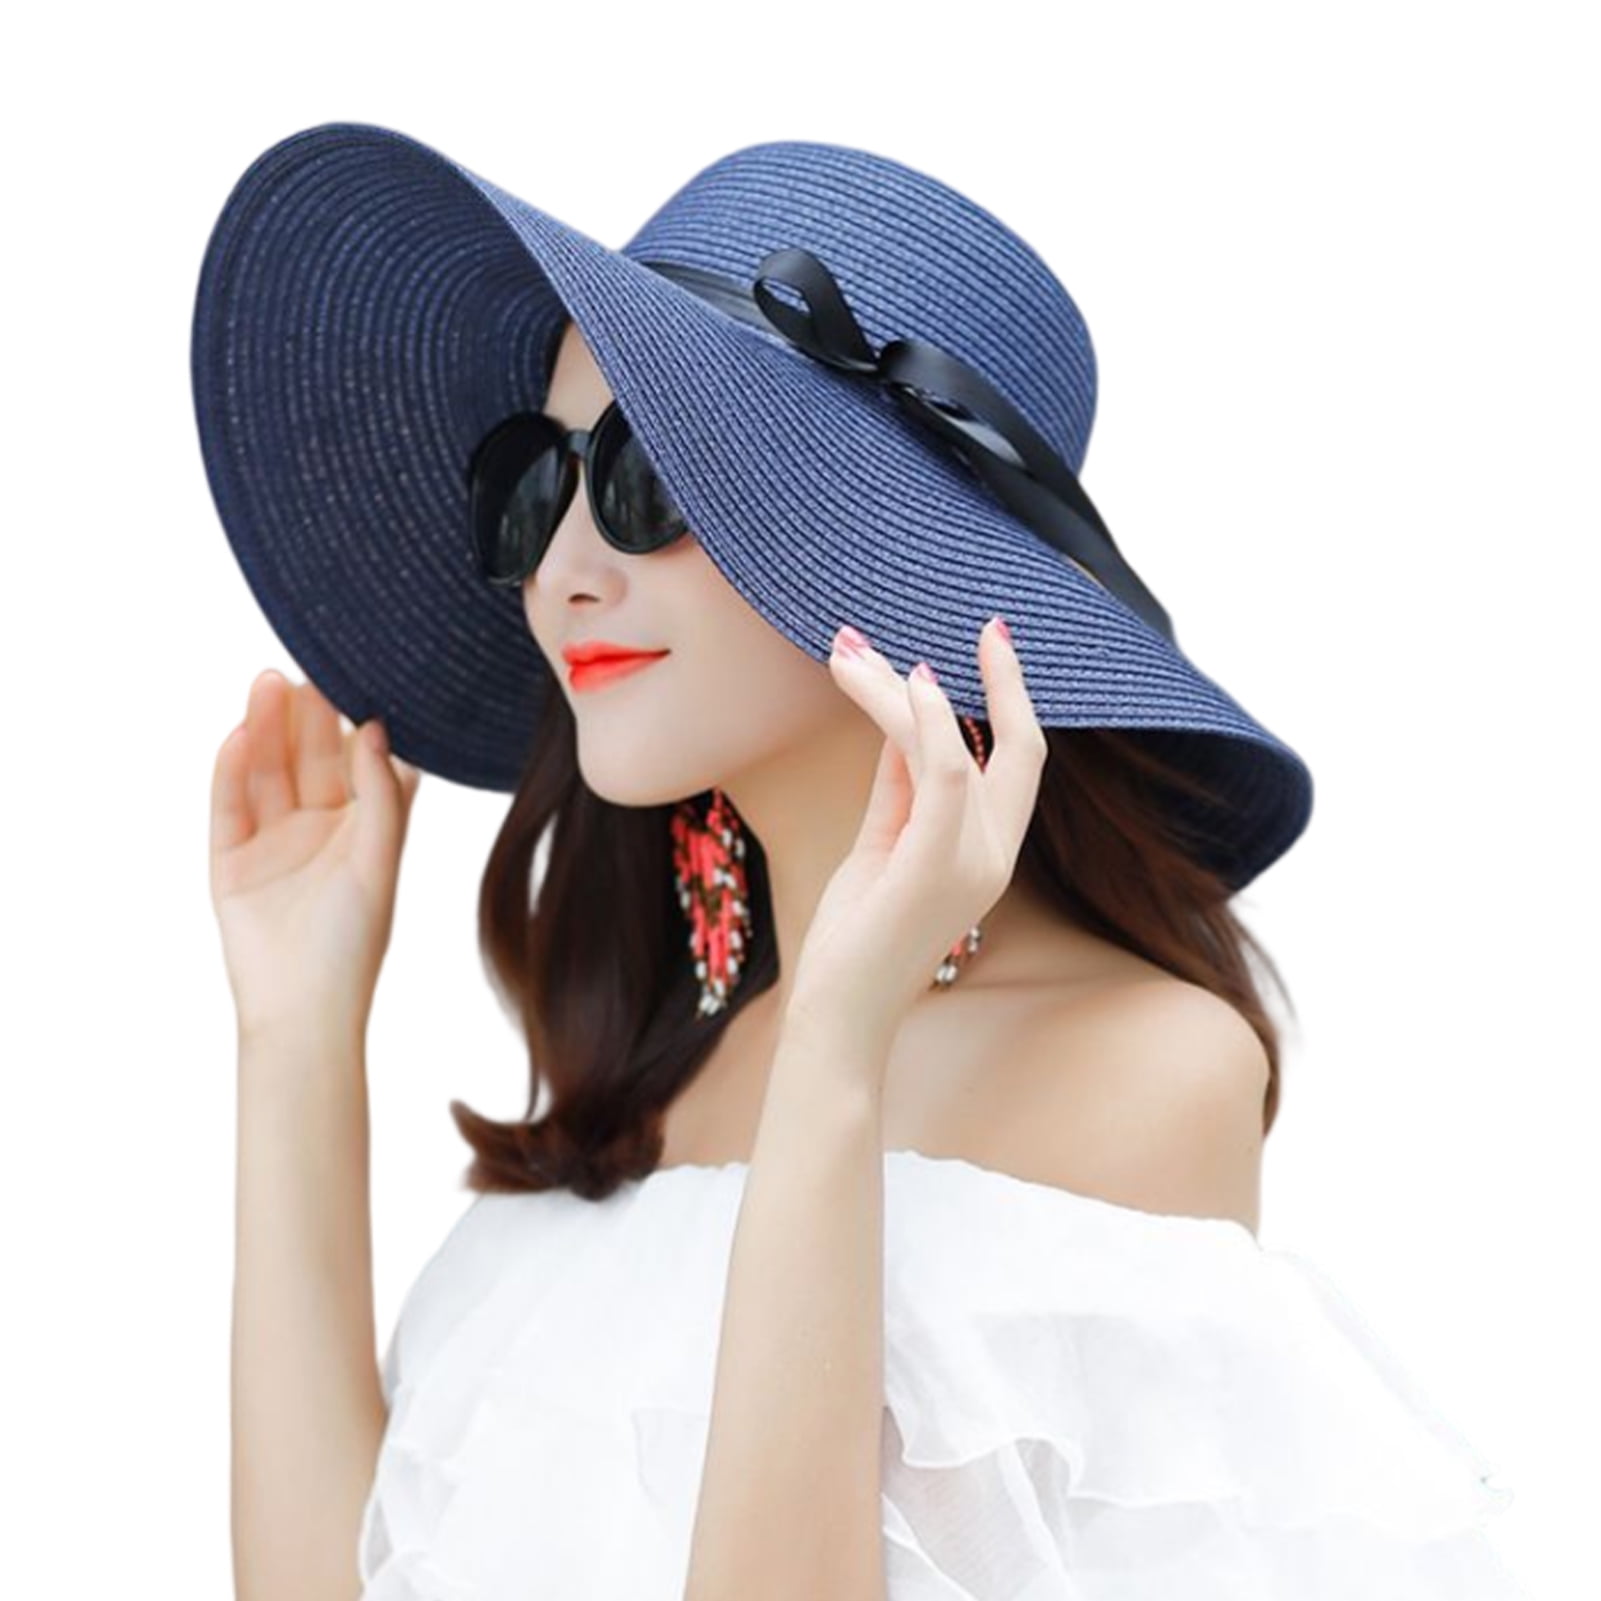 Hats for Women - Summer UPF50+ Sun Hat for Women, Big Bowknot Braid Fabric Hat  Floppy Foldable Roll up UV Protection Beach Cap 